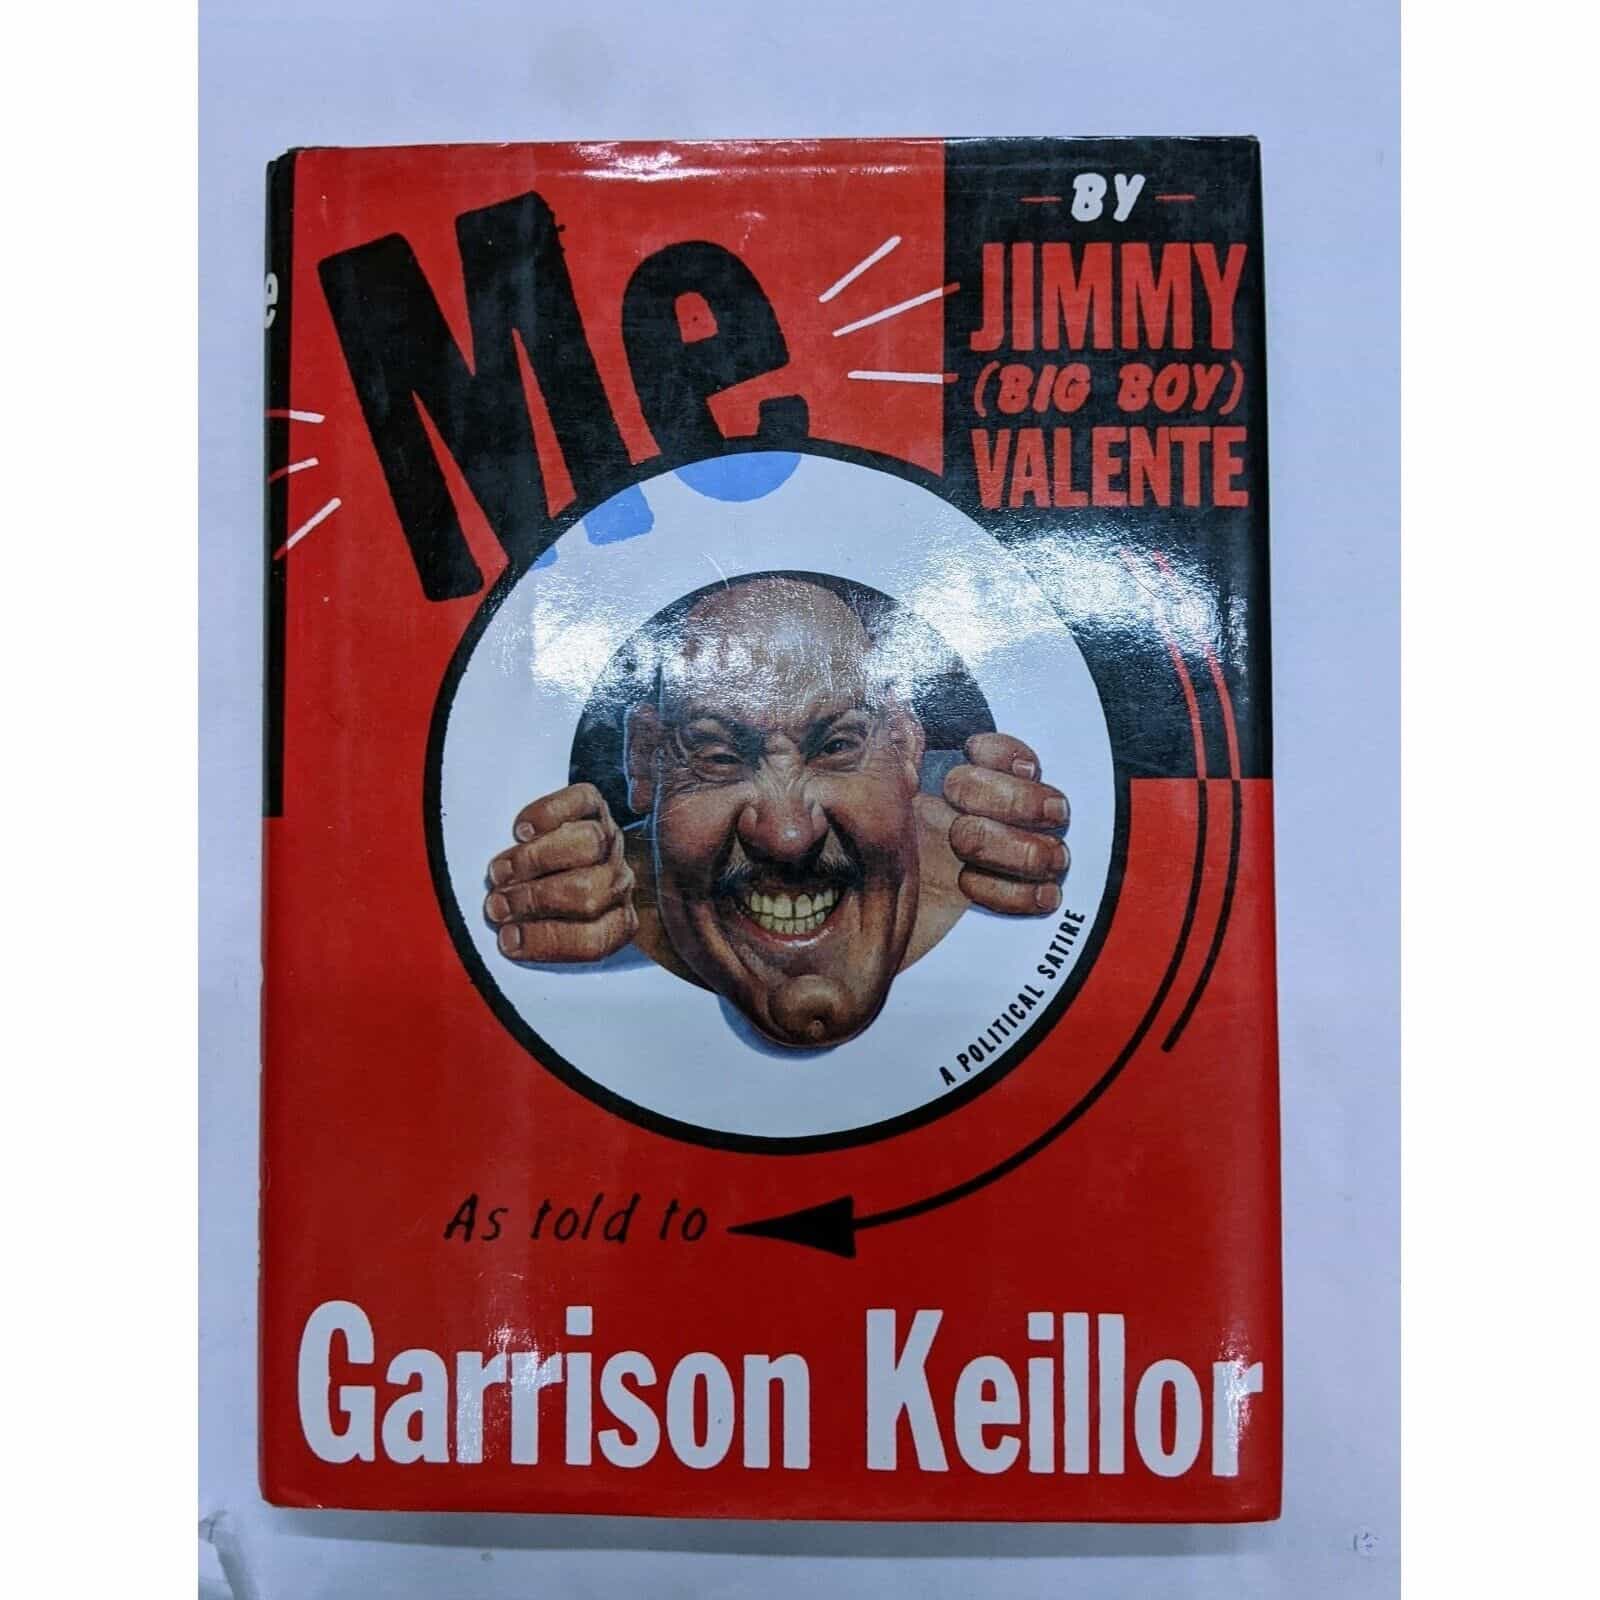 Me by Jimmy Big Boy Valente as told by Garrison Keillor Book